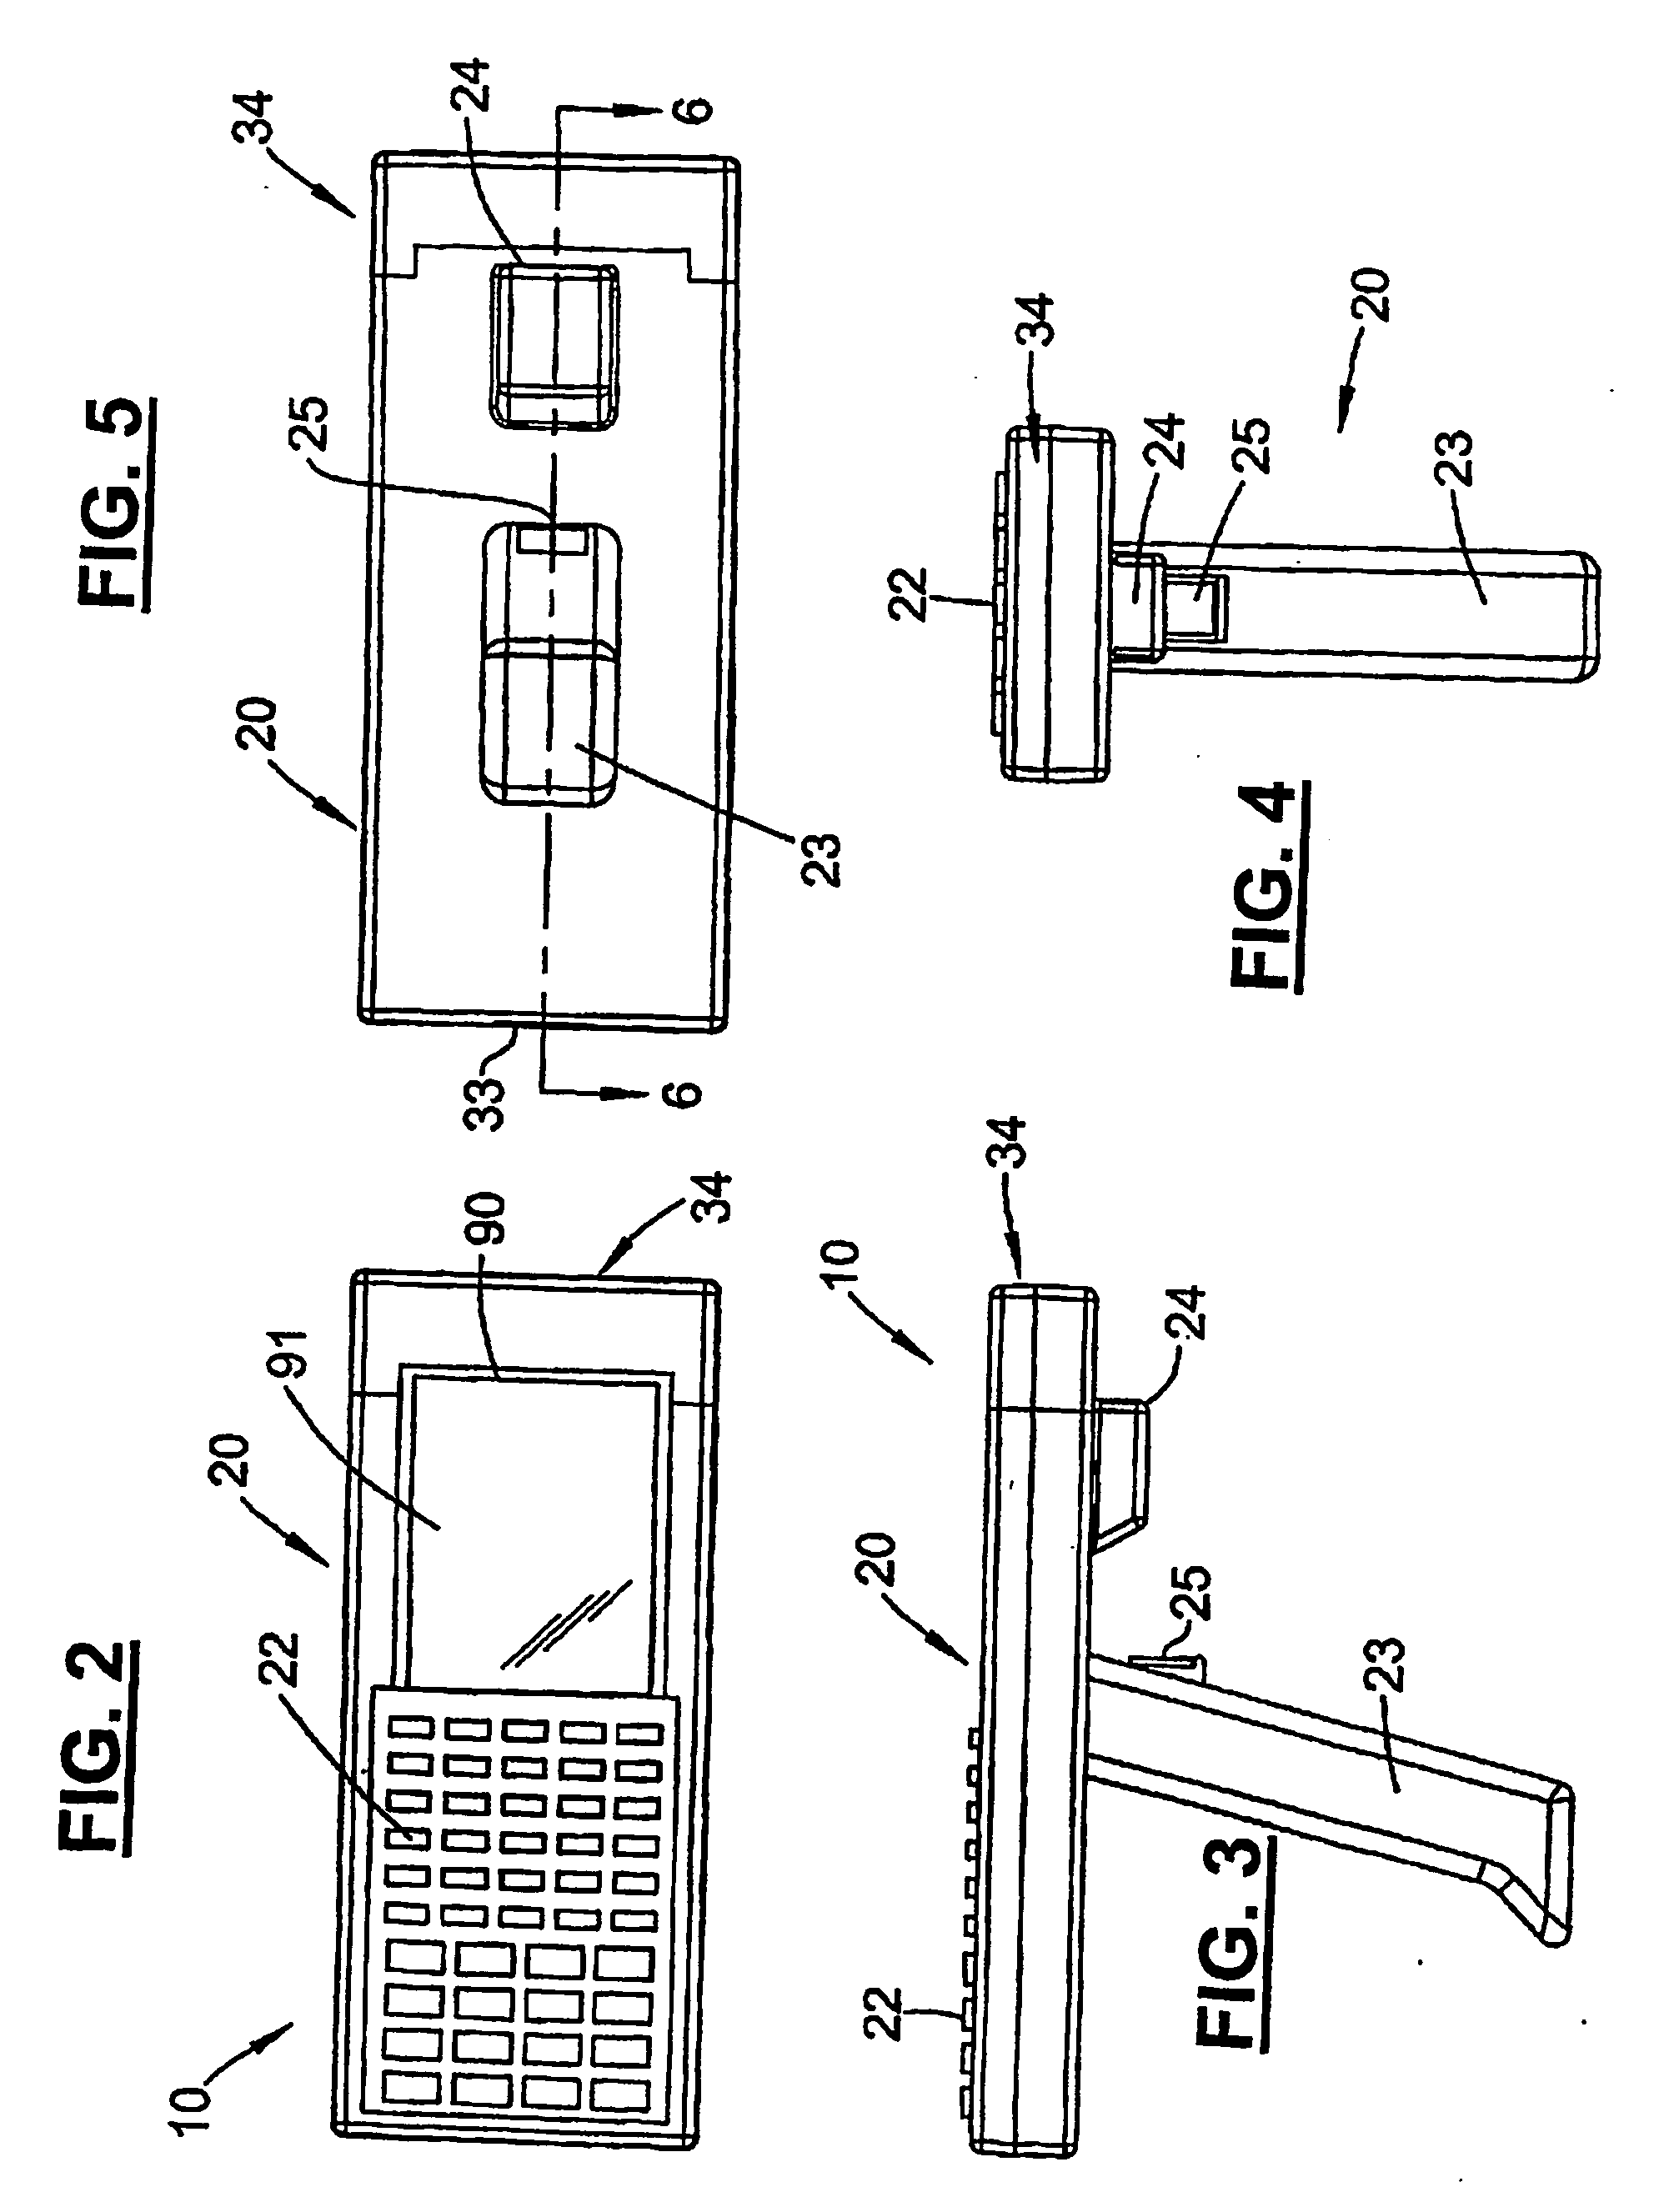 Portable data entry device with a detachable host pda